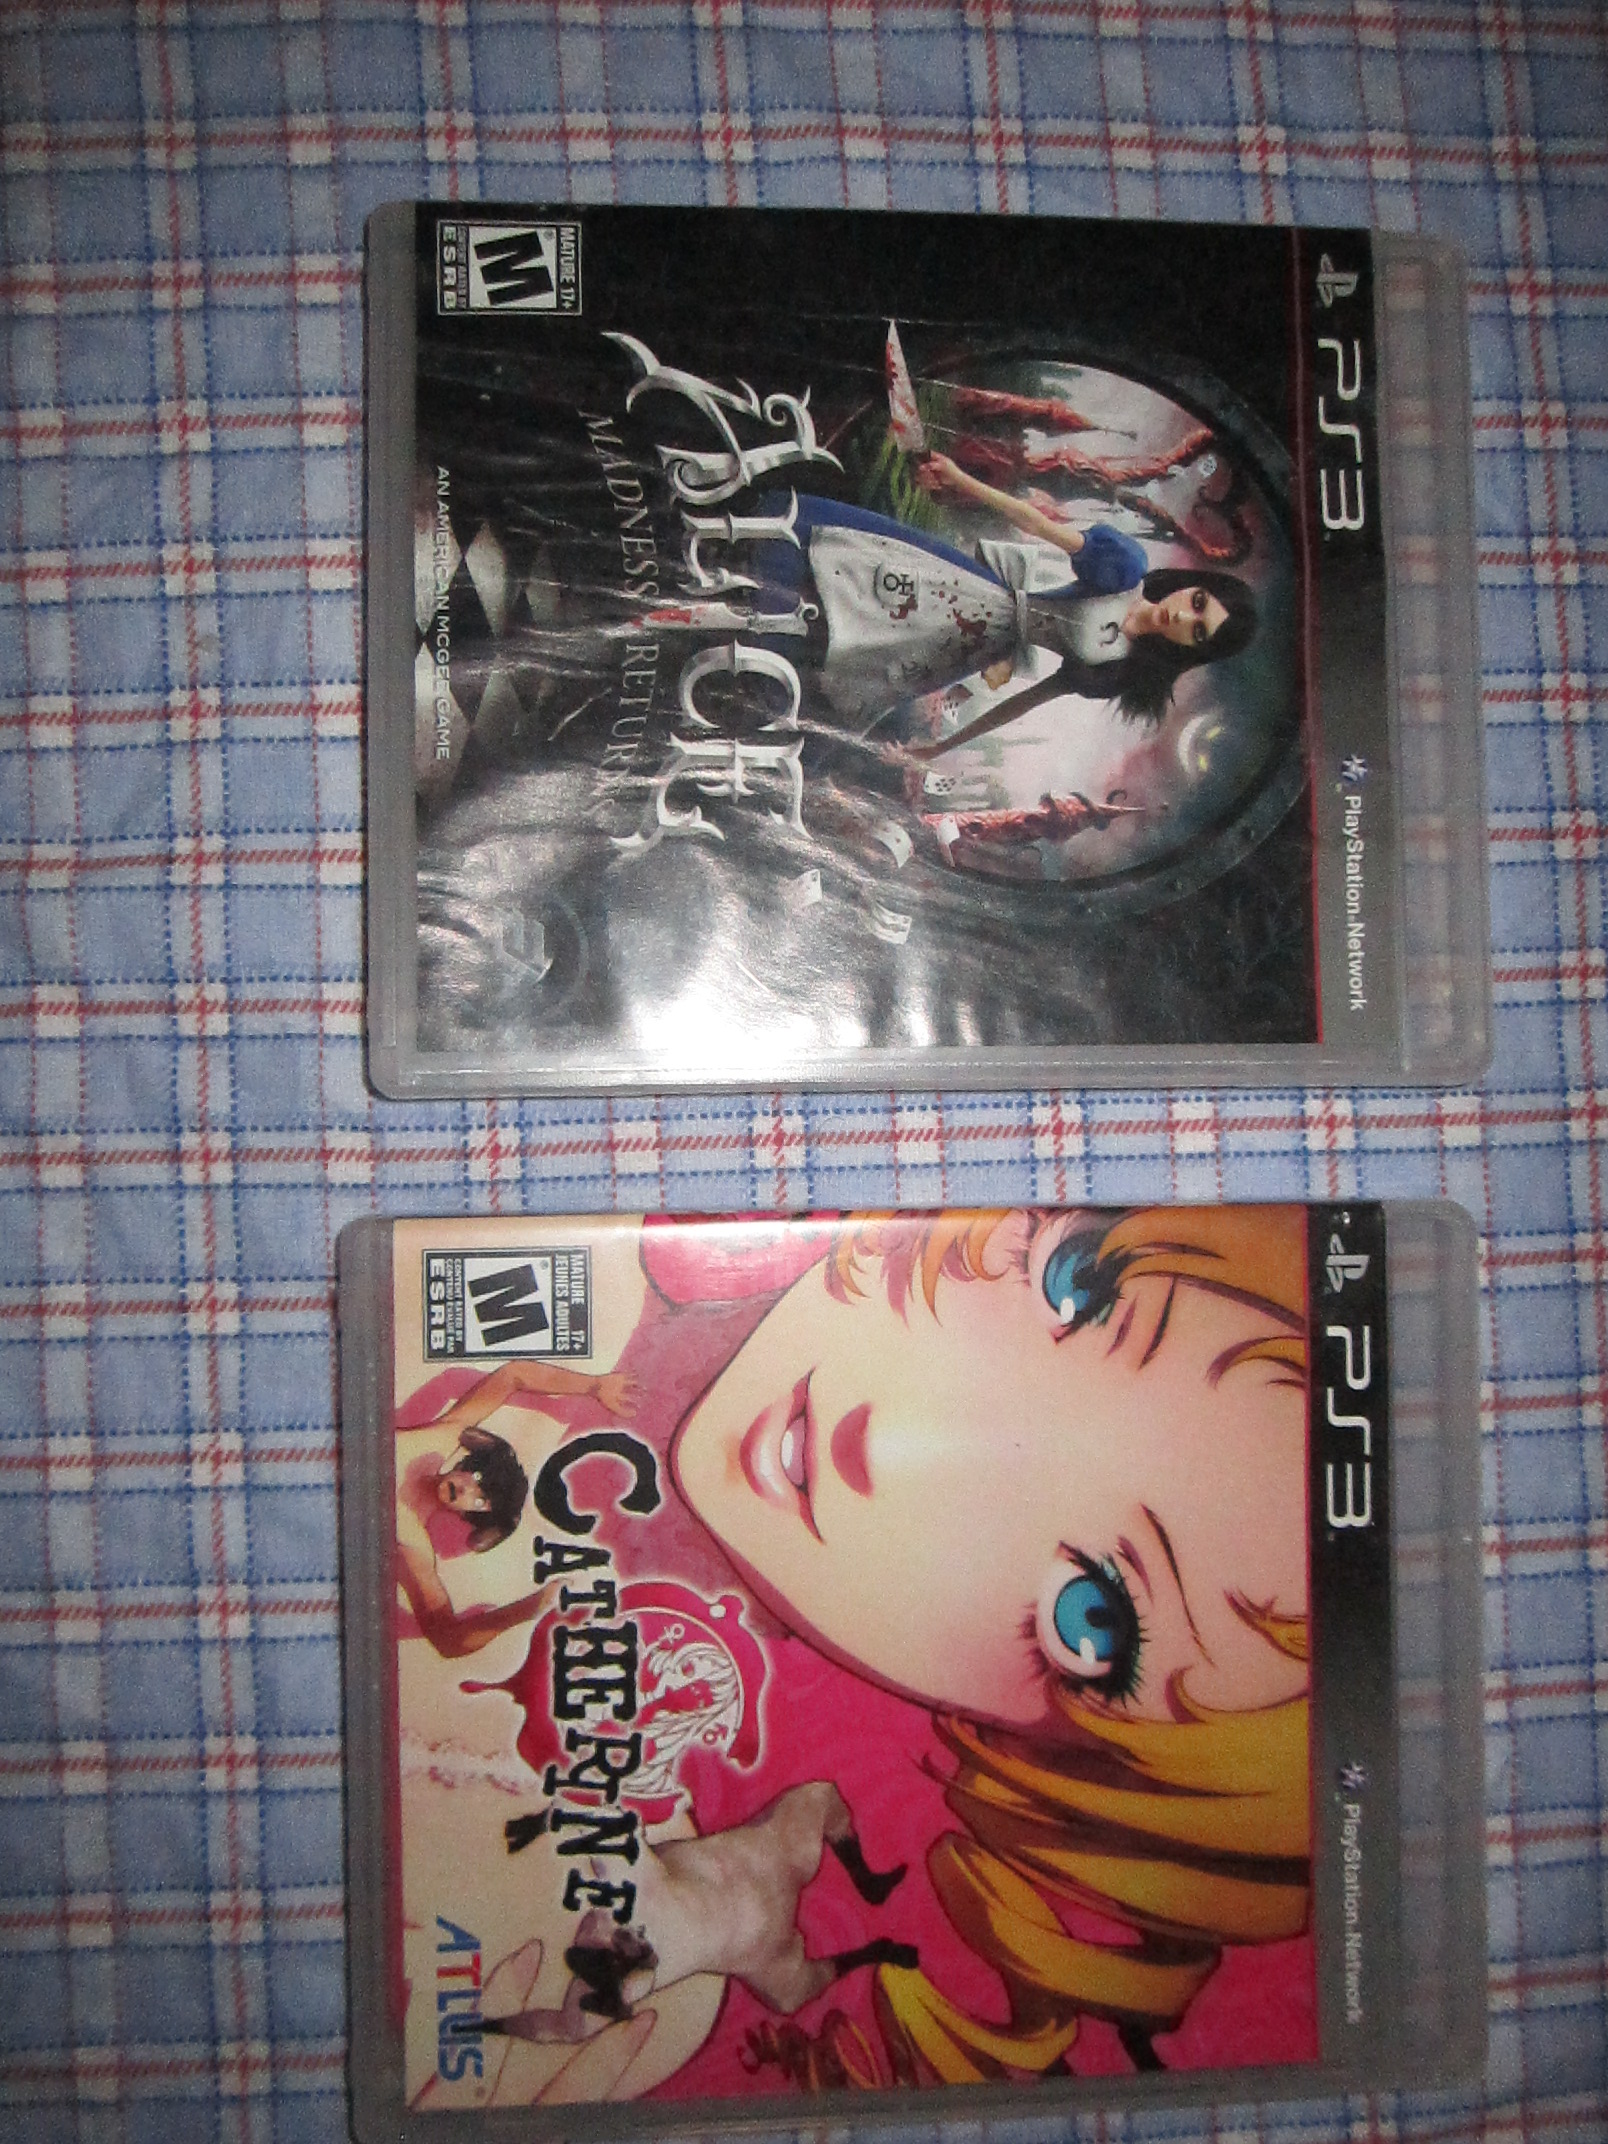 I have beat both of these games. These two are my favorites.